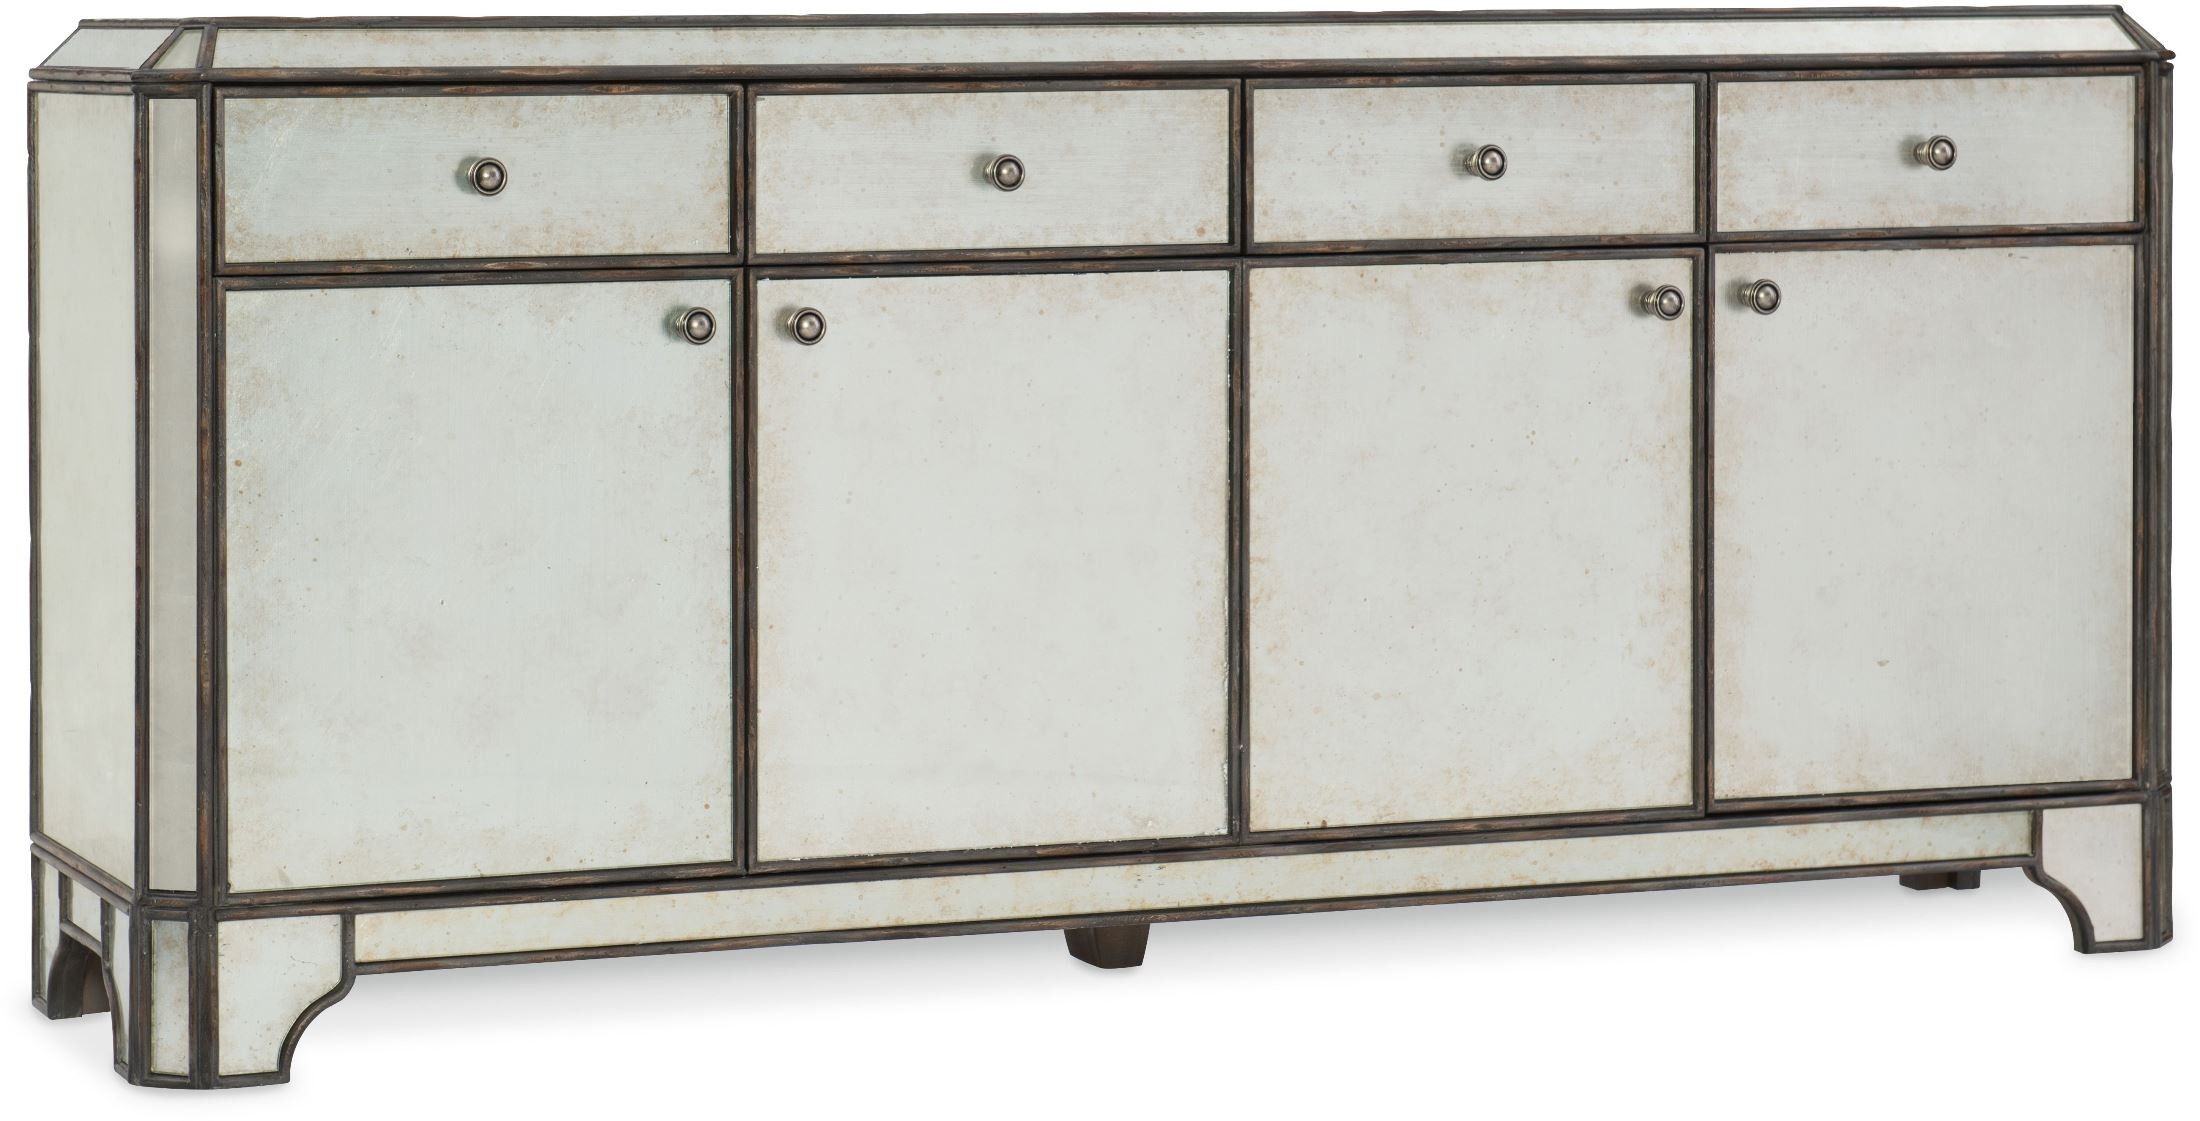 Arabella Painted Charcoal 74" Entertainment Credenza With Regard To Most Current Abhinav Credenzas (View 6 of 20)